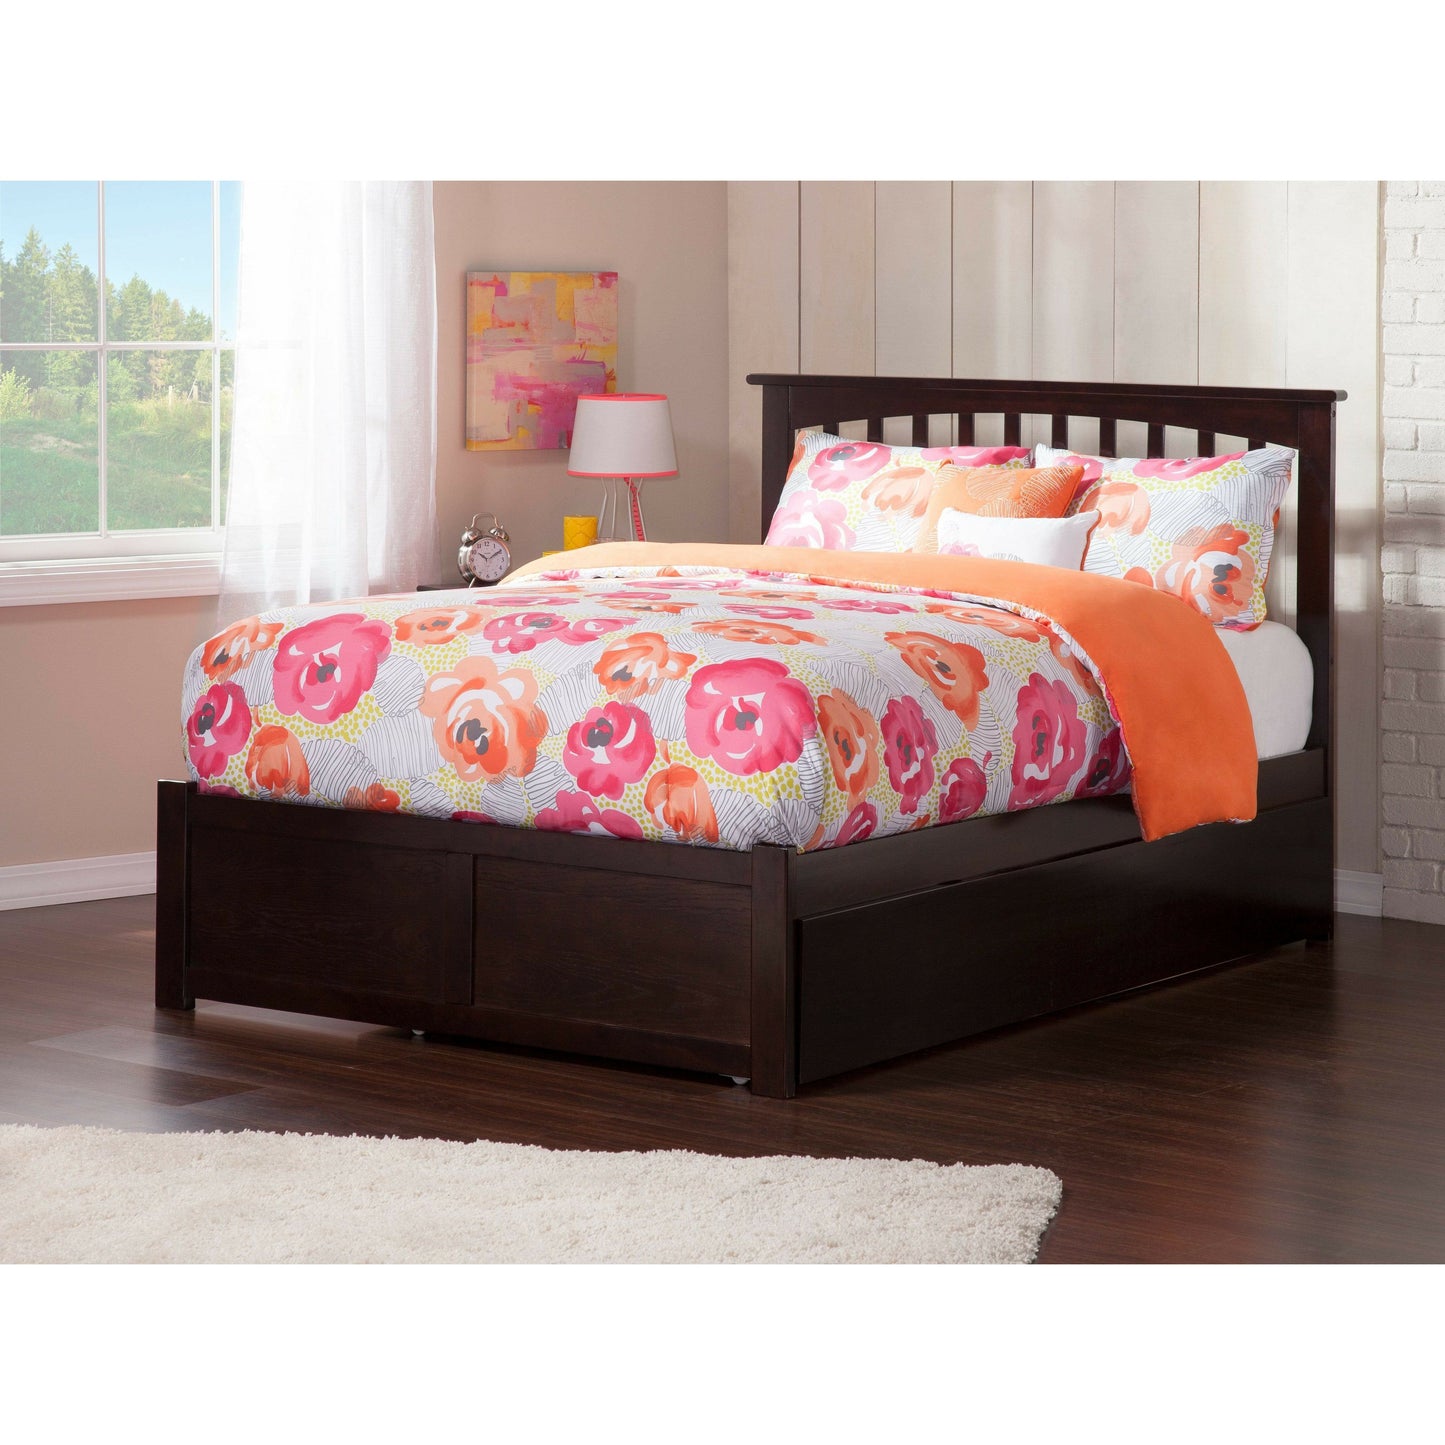 Atlantic Furniture Bed Mission Full Platform Bed with Flat Panel Foot Board and Full Size Urban Trundle Bed in Espresso